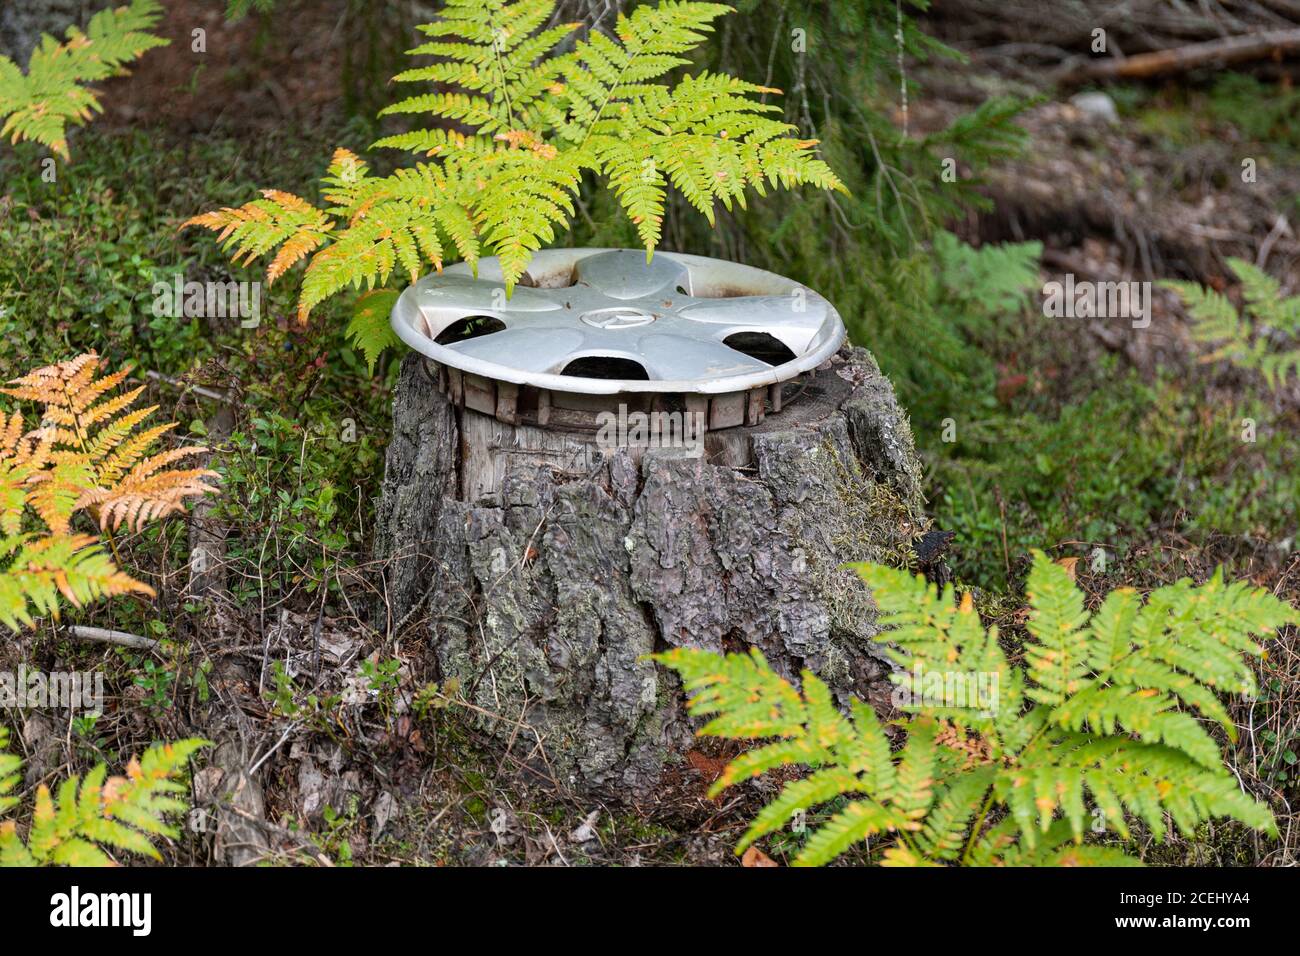 Plastic Mazda hubcap placed on tree stump by roadside Stock Photo